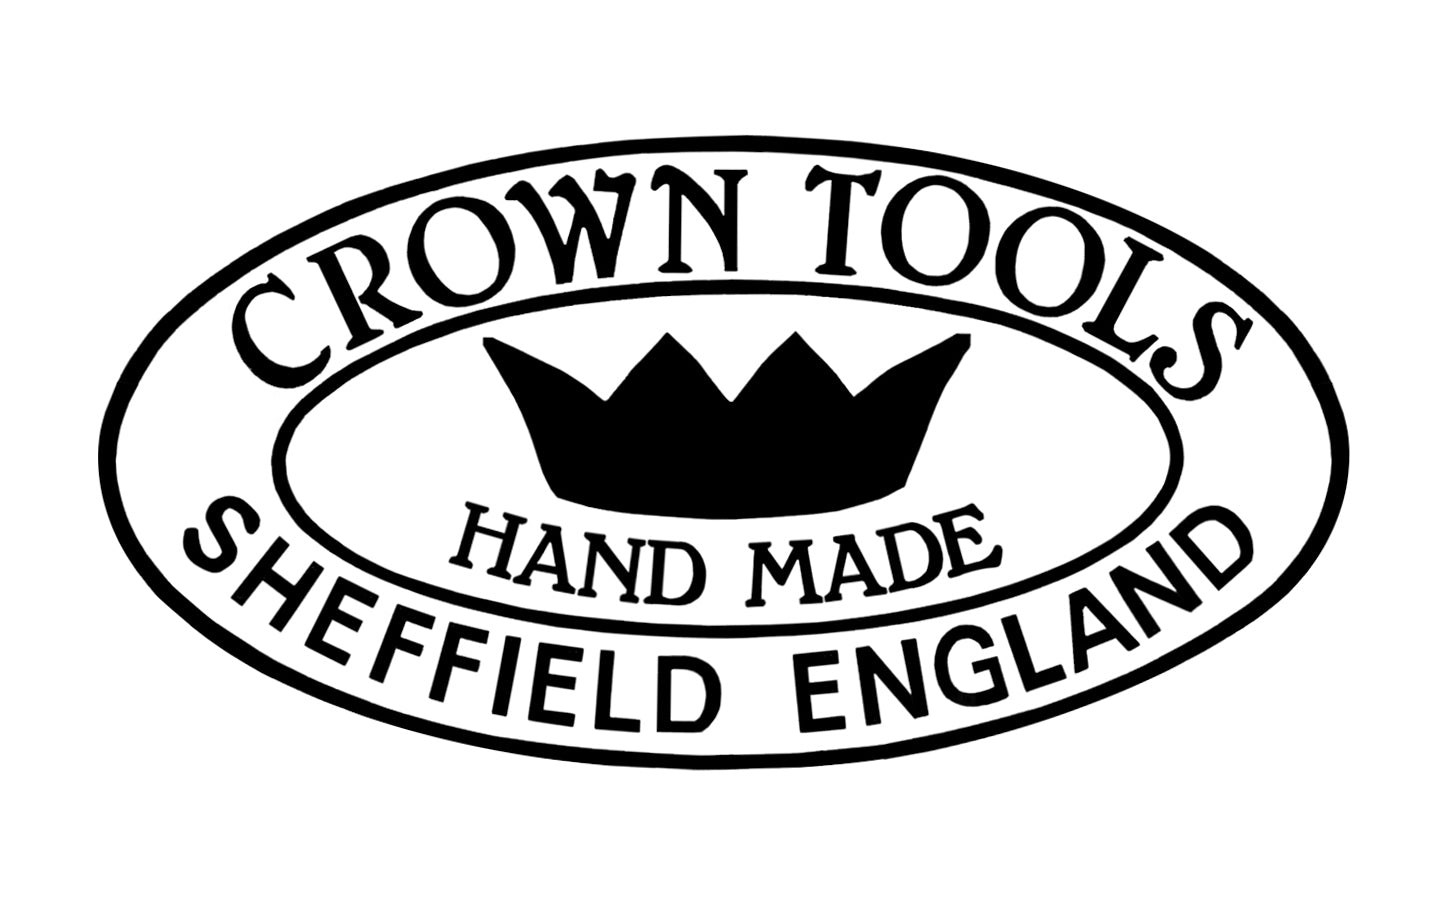 This Crown Tools 4" Mini Reversible Saw is a high quality saw with fine teeth made by Crown Tools.  Made in Sheffield, England. 20 TPI. Model 187RSMW.